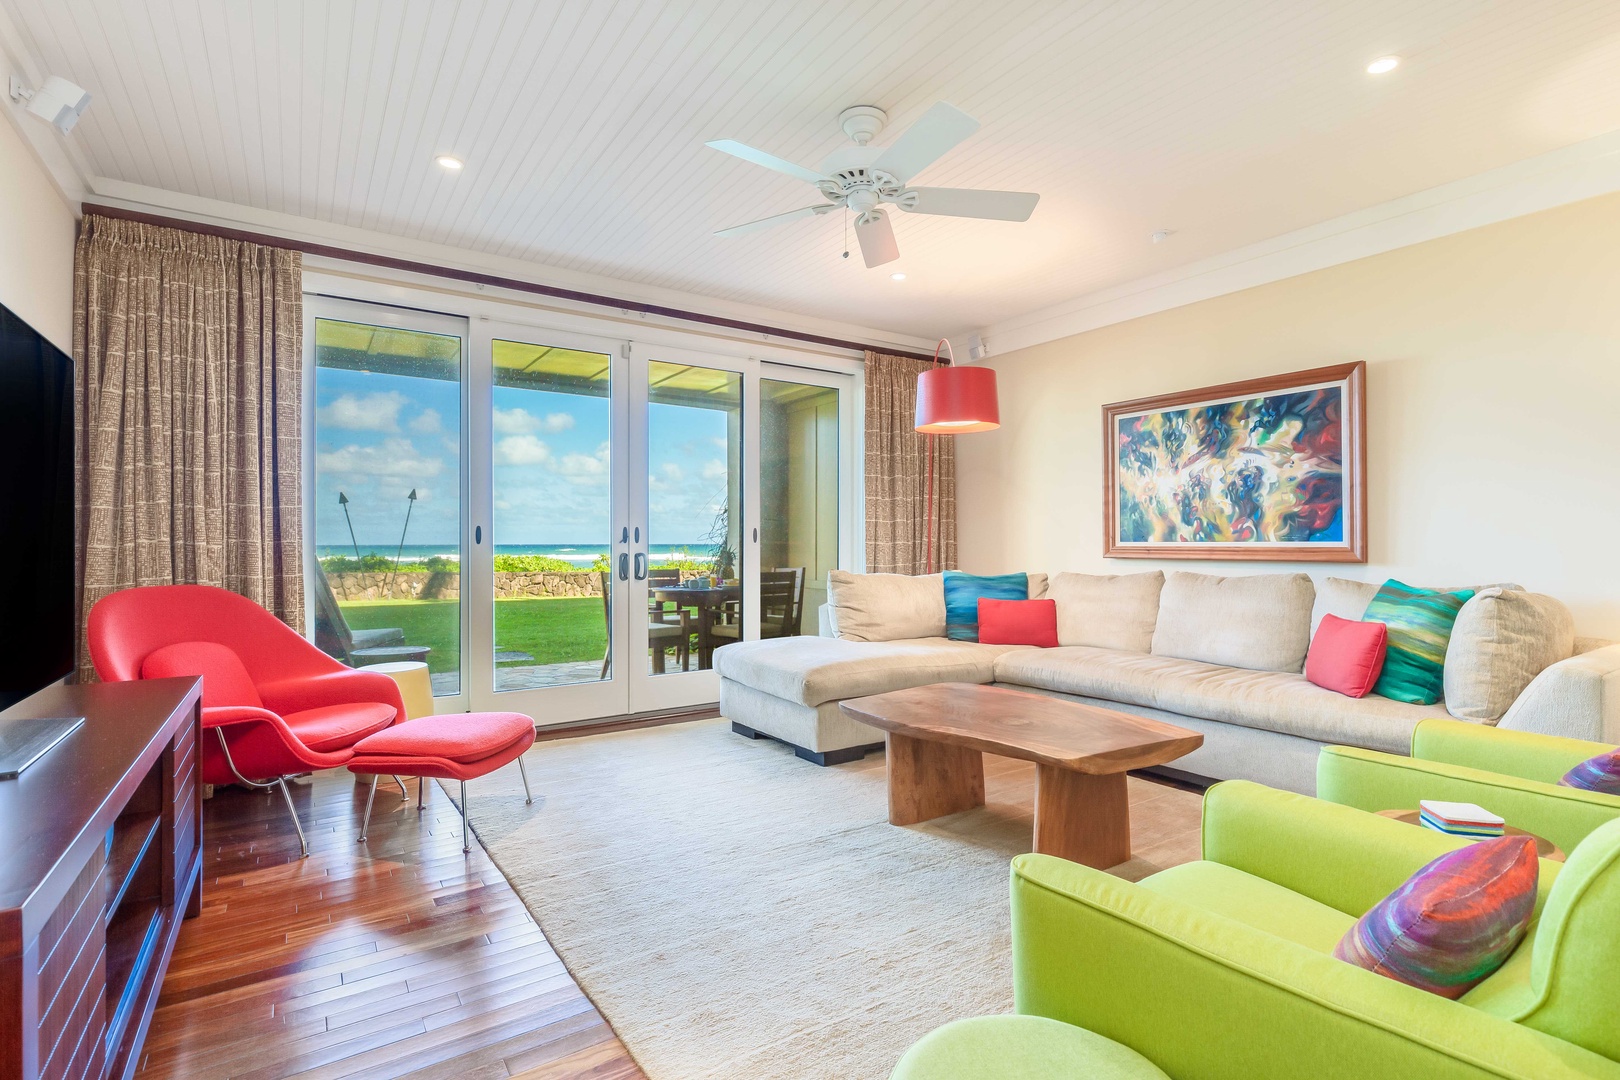 Kahuku Vacation Rentals, Turtle Bay Villas 116 - Stunning views from the comfort of the living room